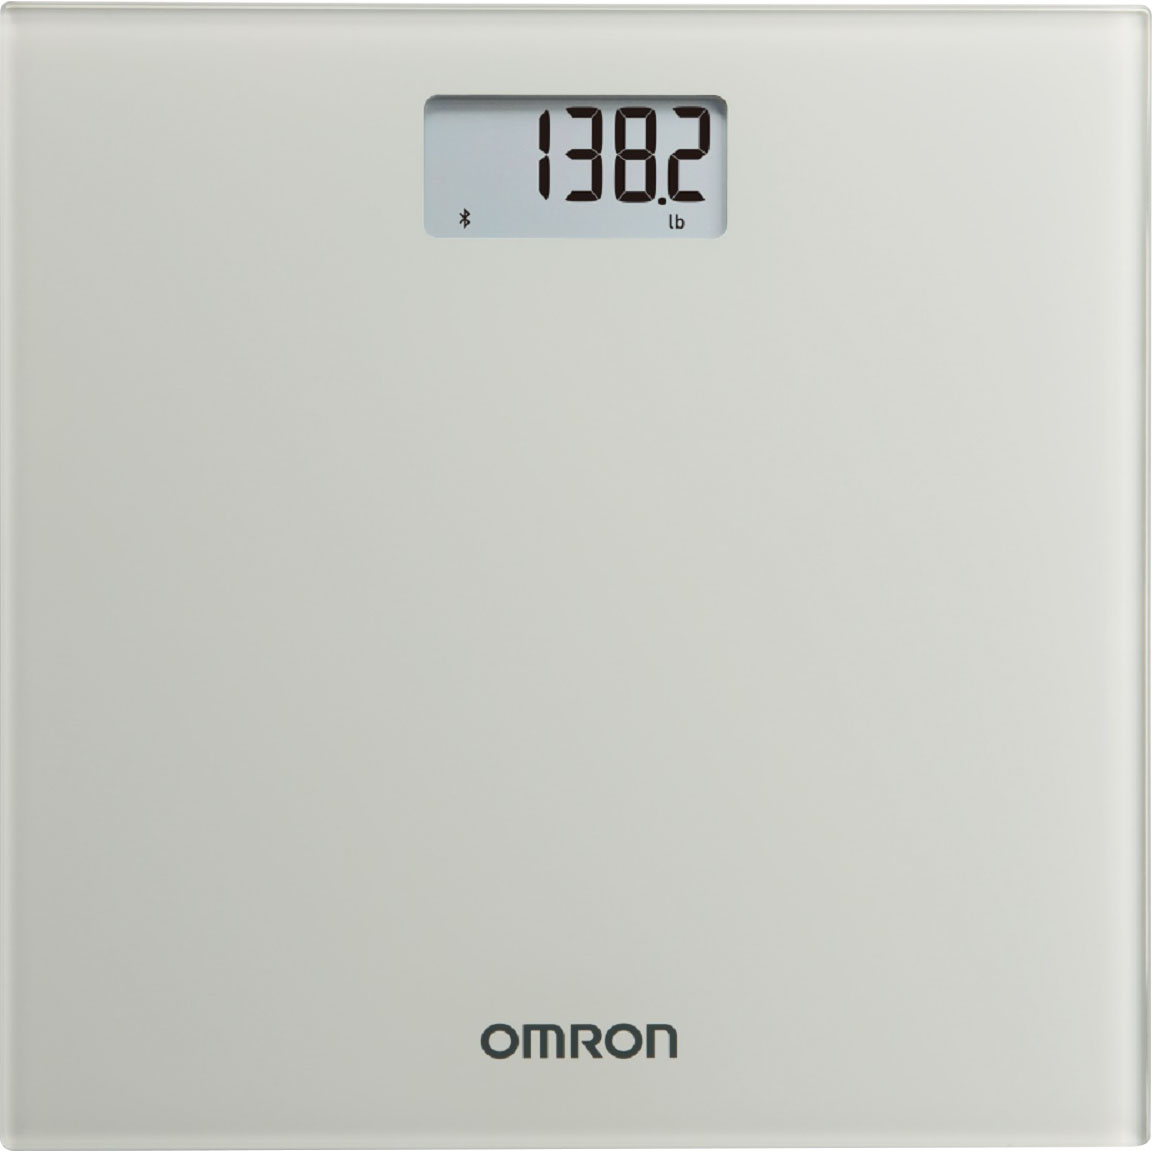 Omron BCM-500 Bluetooth Body Composition Monitor and Scale - Black for sale  online